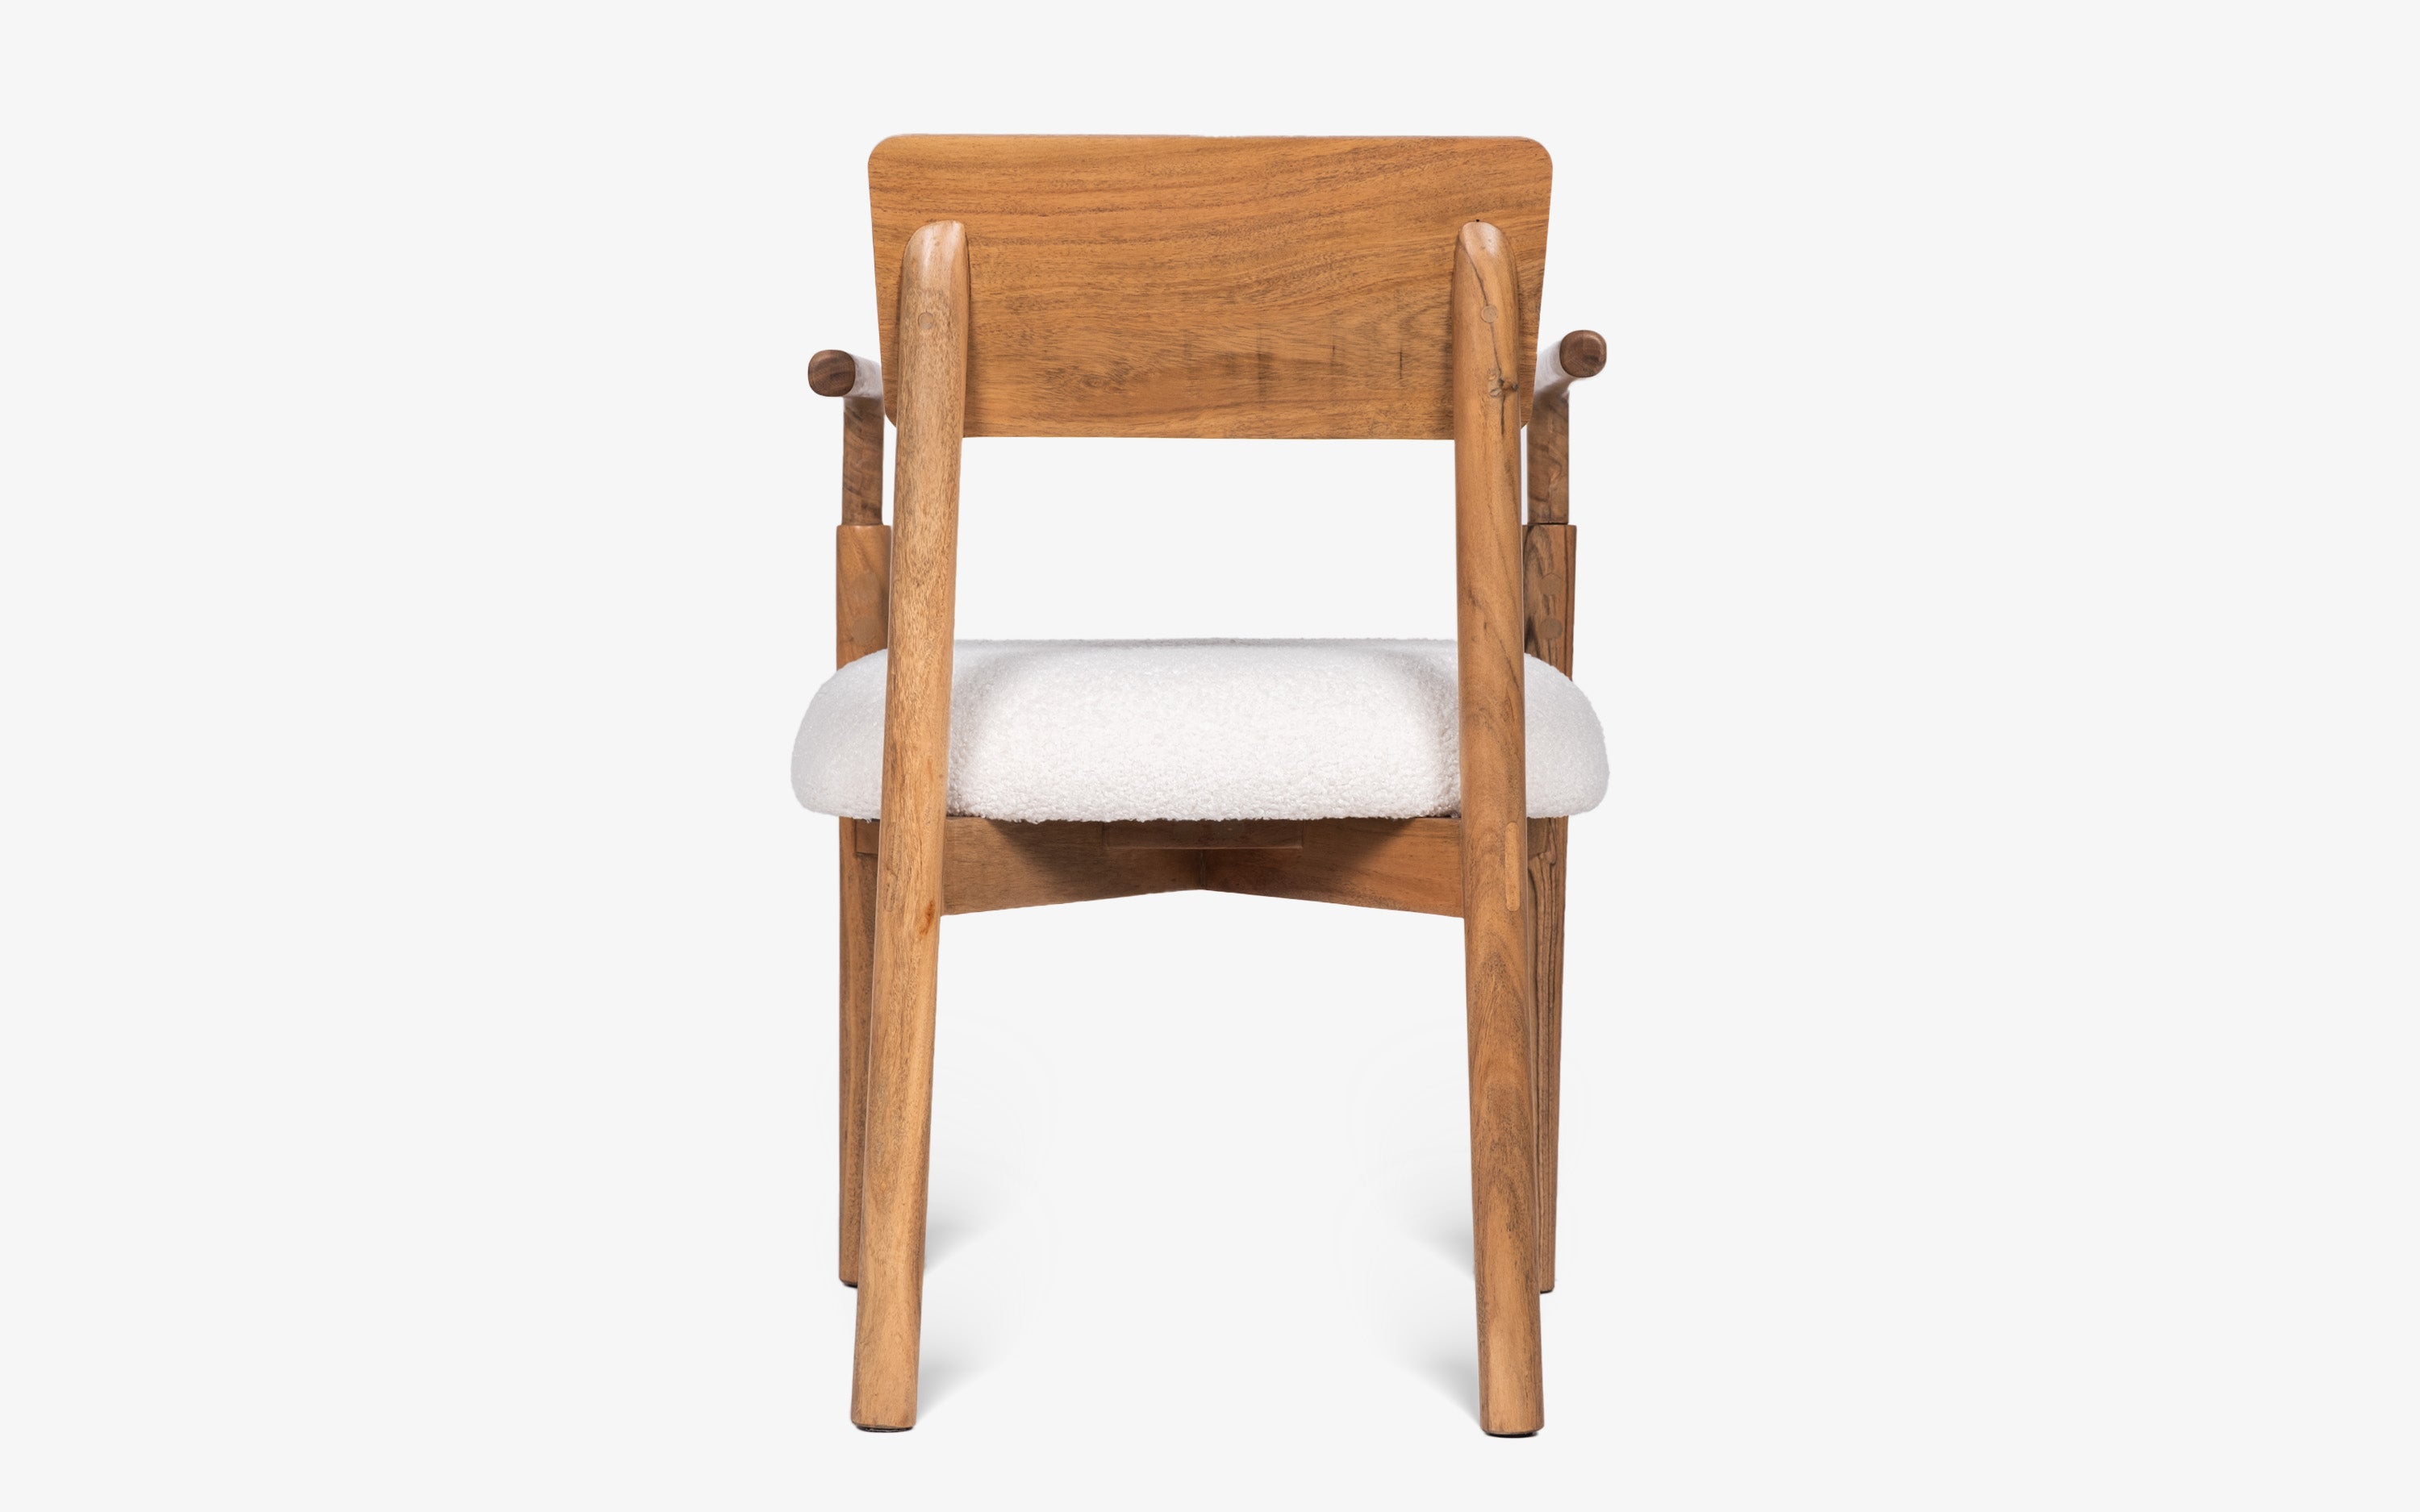 Andaman wooden chair for balcony. Andaman wooden chair with cushion. OT Home